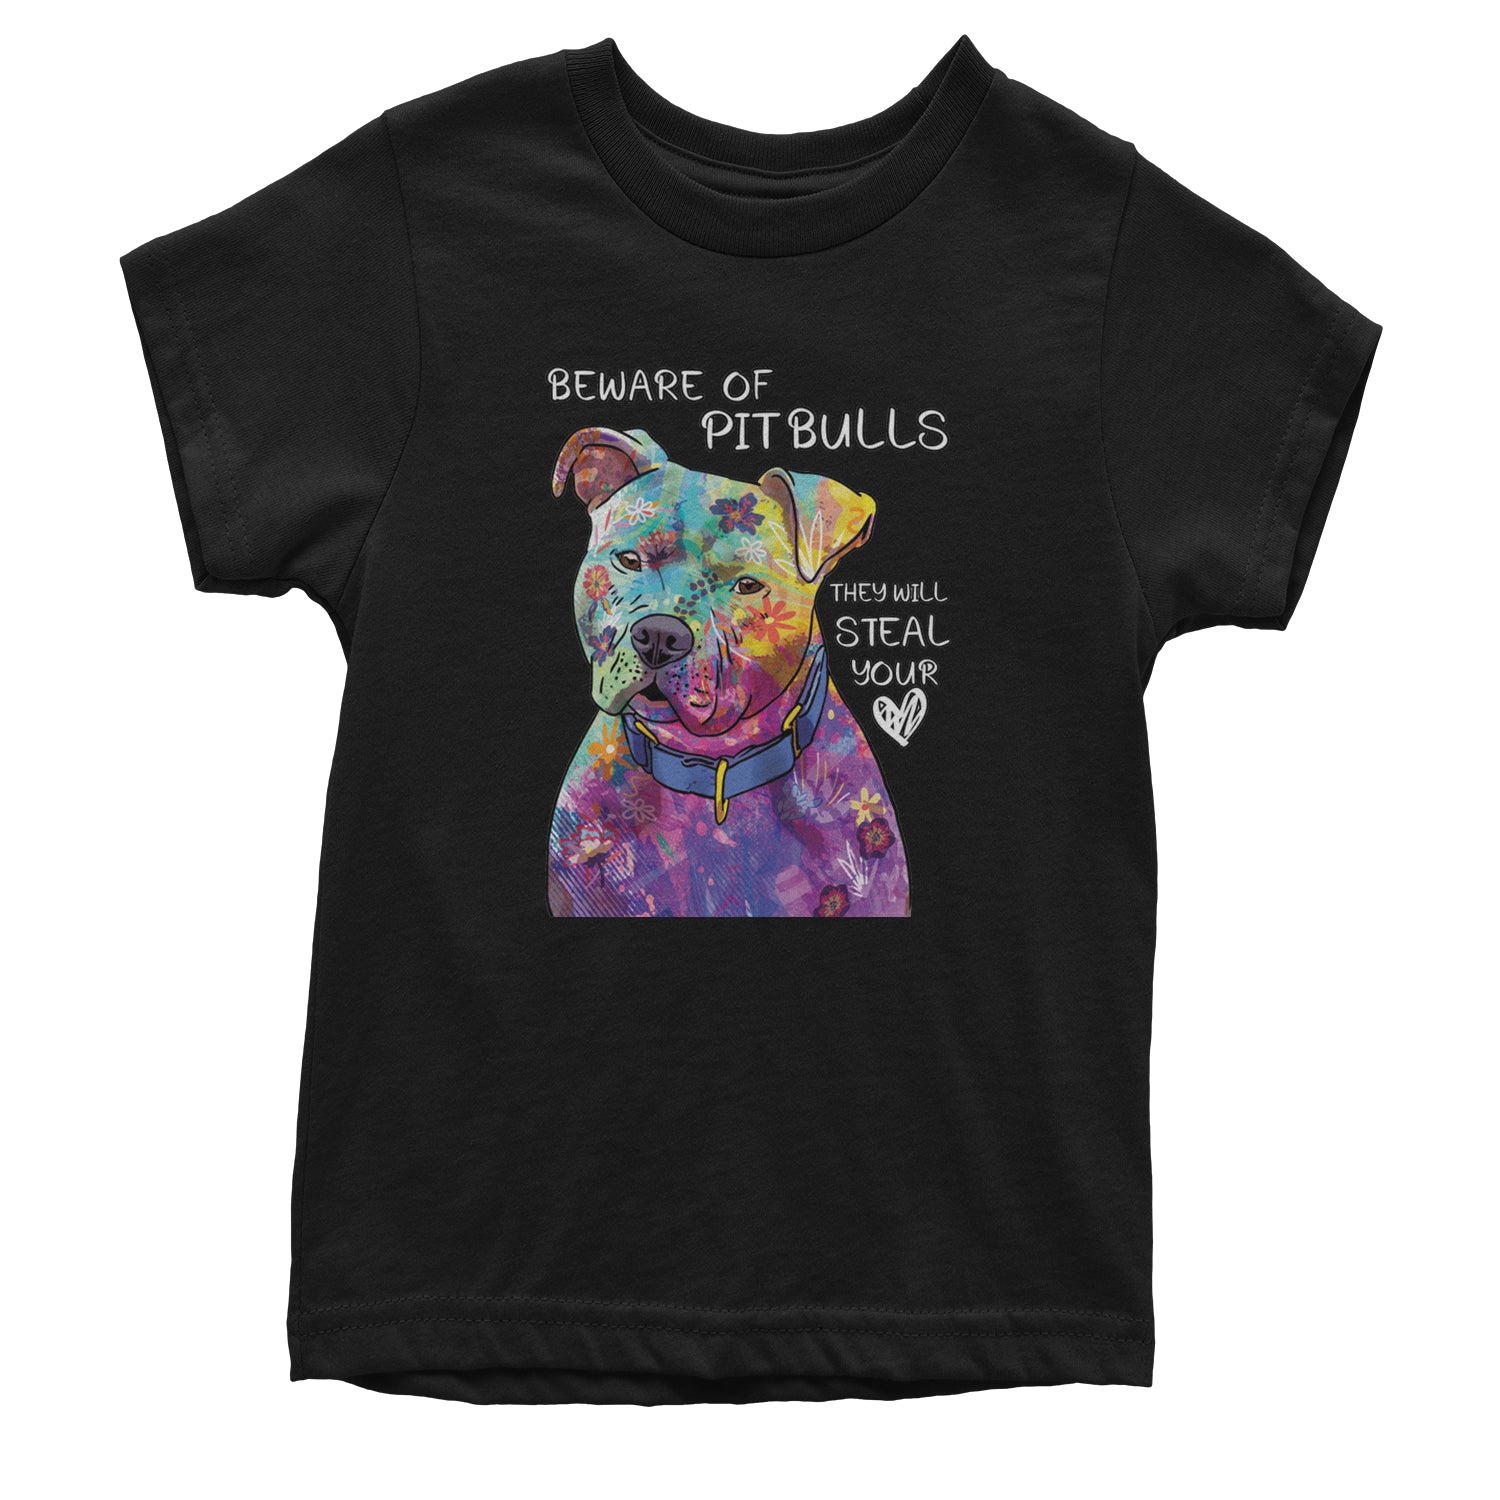 Beware Of Pit Bulls, They Will Steal Your Heart  Youth T-shirt